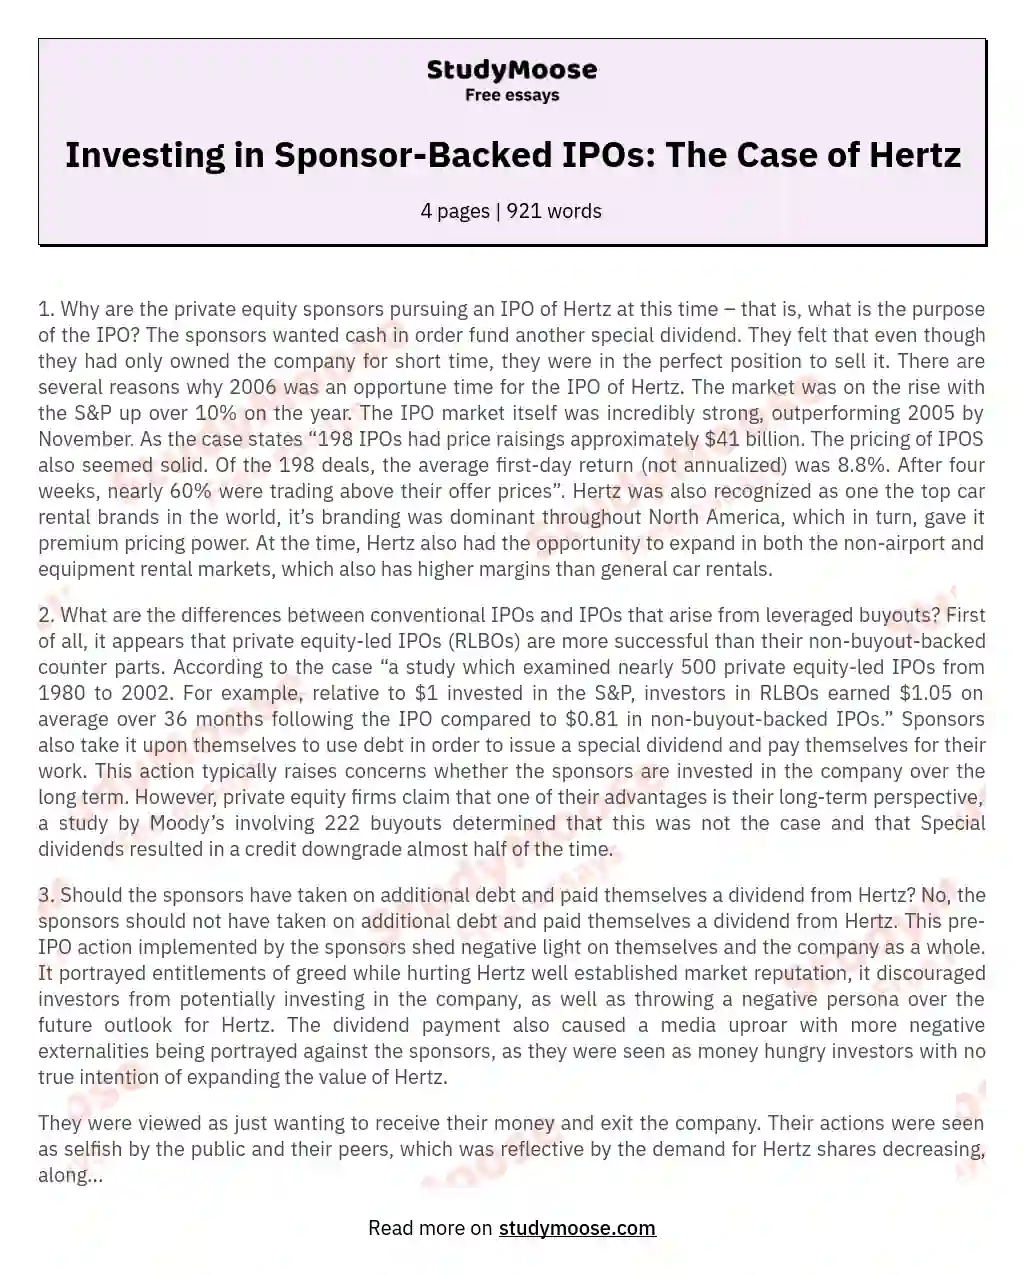 Investing in Sponsor-Backed IPOs: The Case of Hertz essay